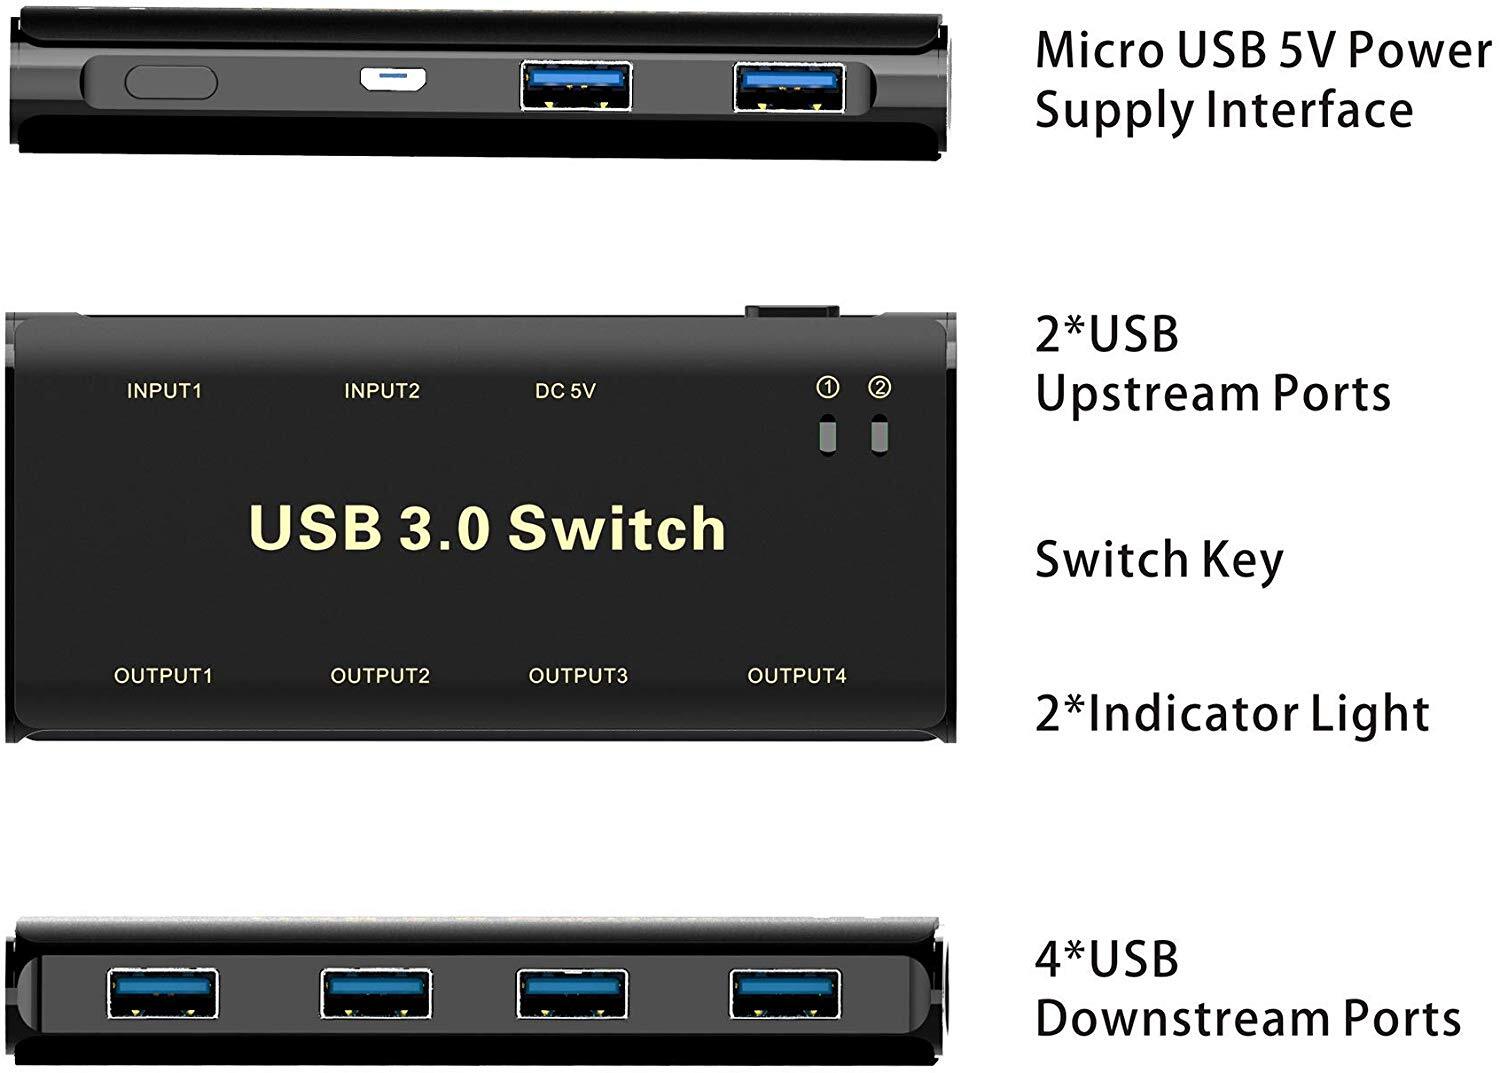 USB 3.0 Switch Selector,ABLEWE KVM Switcher Adapter 4 Port USB Peripheral  Switcher Box Hub for Mouse, Keyboard, Scanner, Printer, PCs with One-Button  Switch and 2 Pack USB Cable